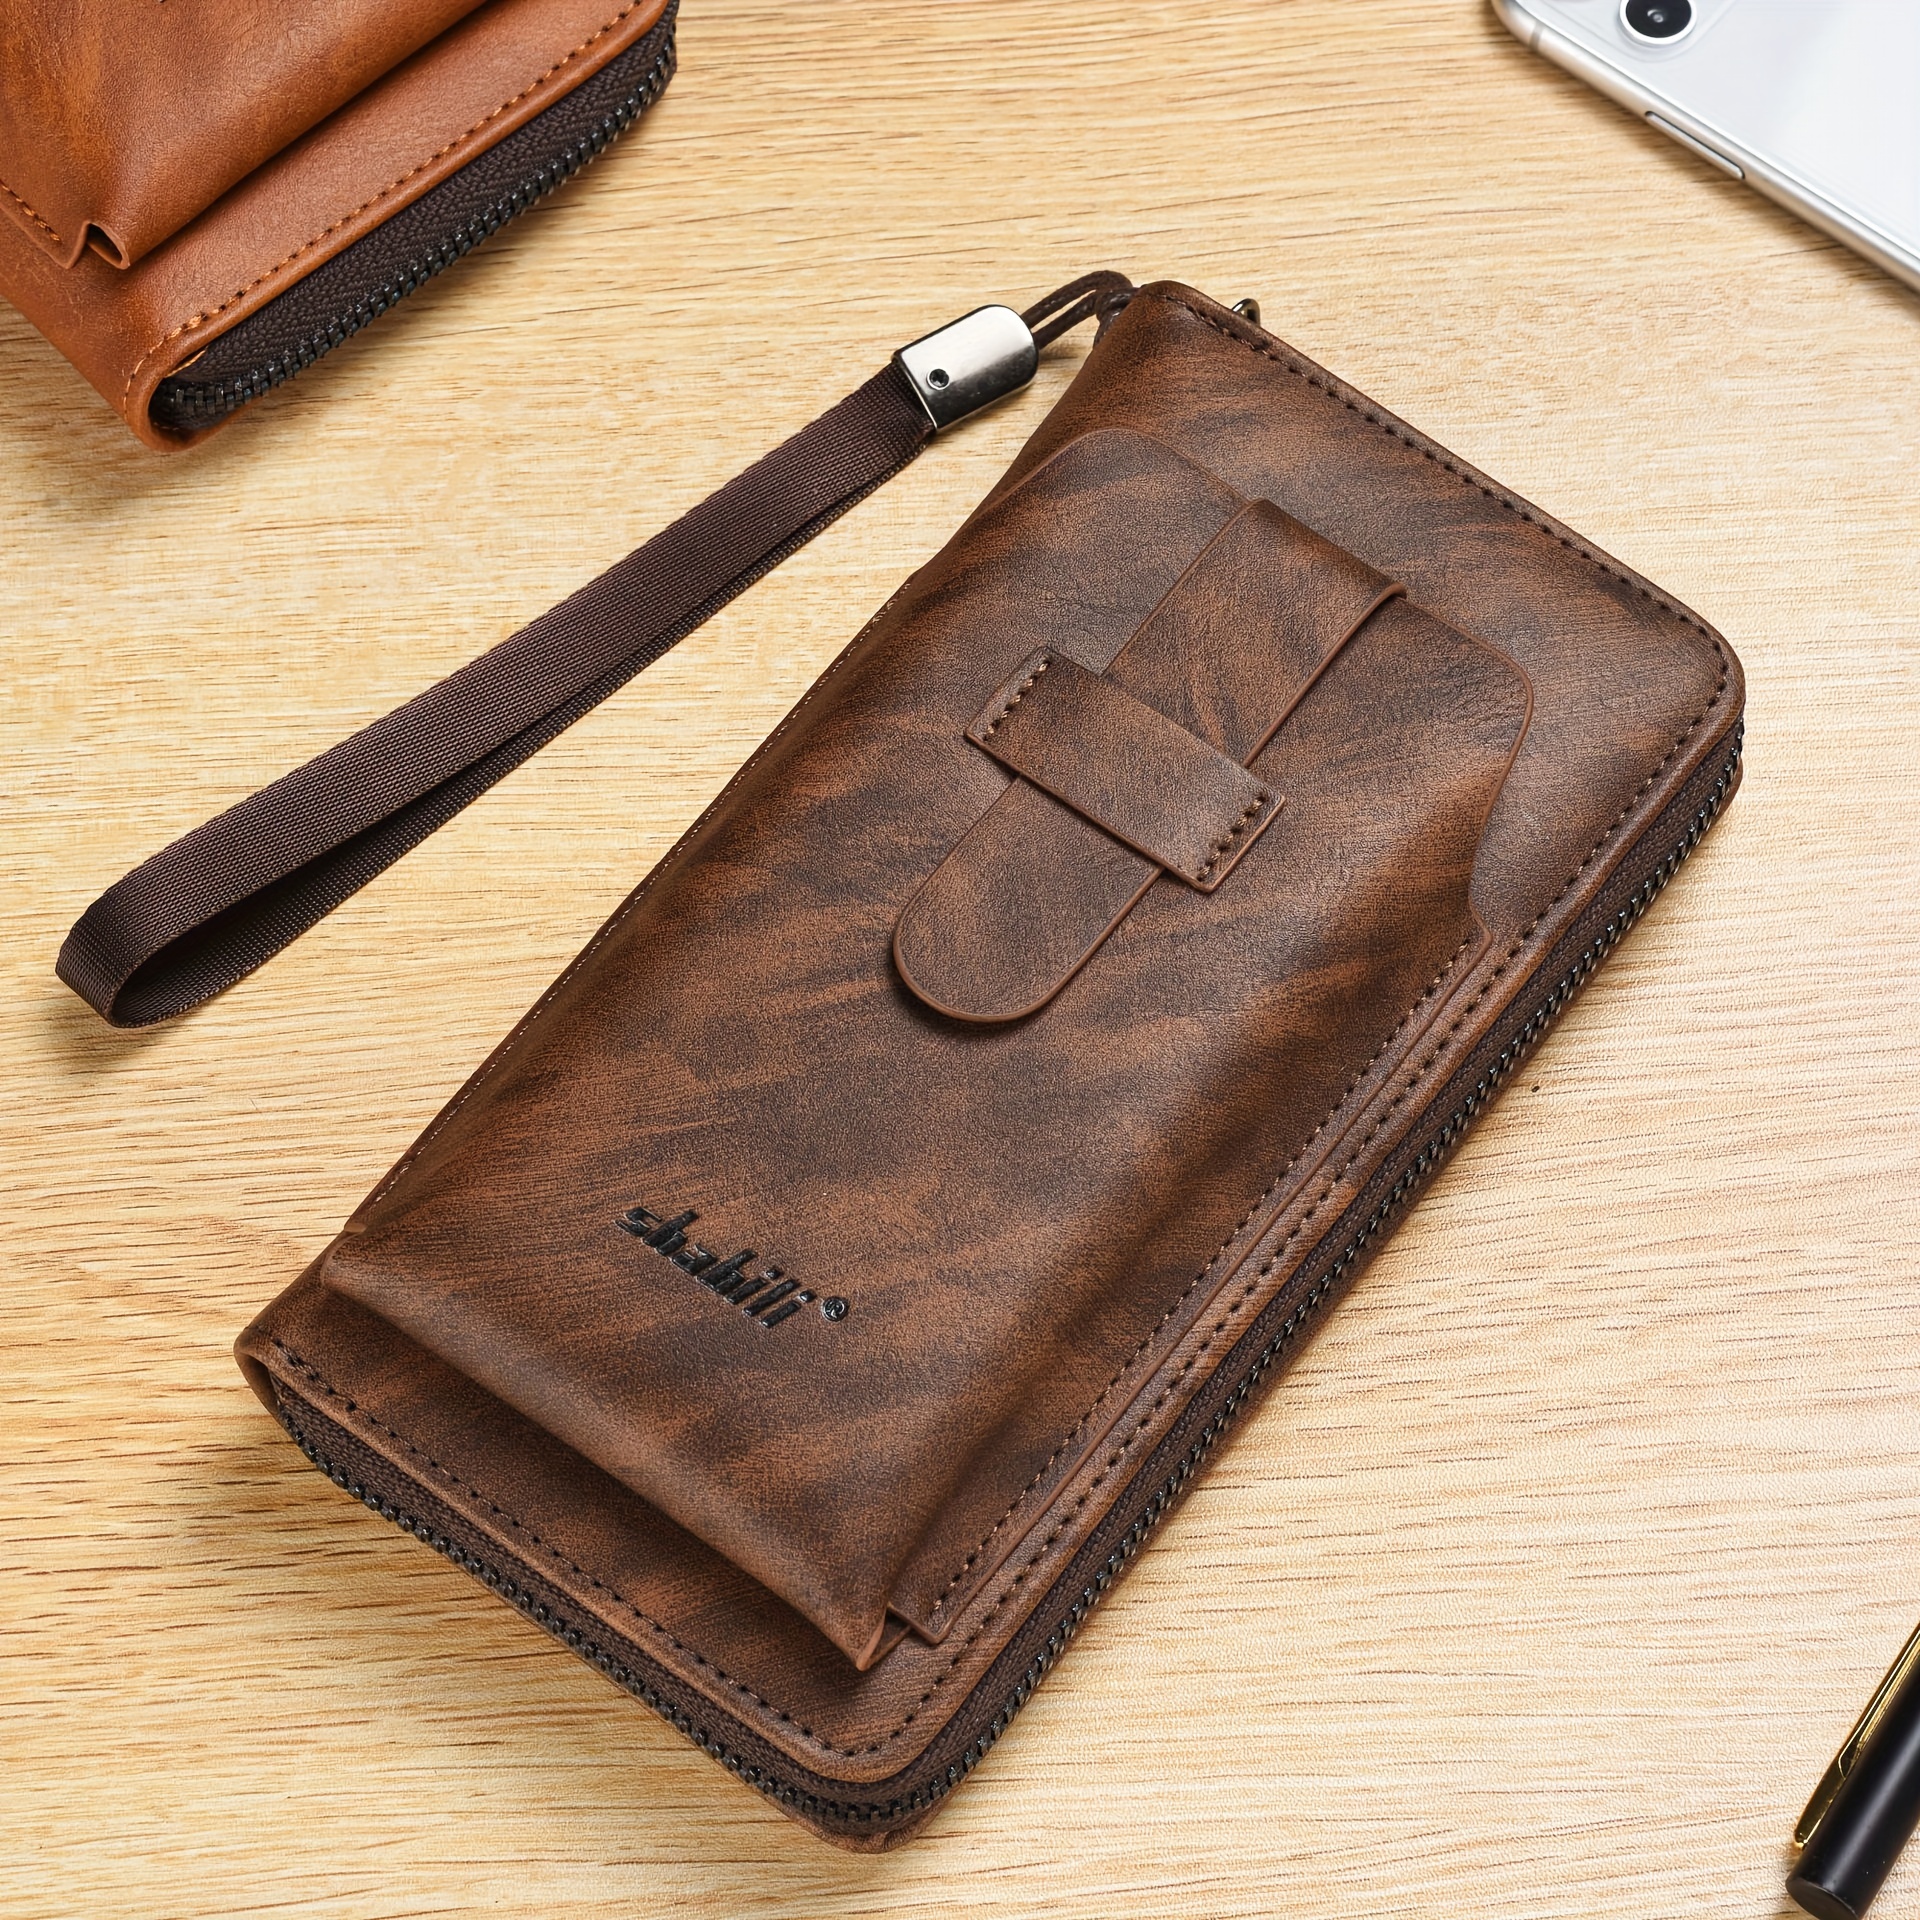 Business Fashion Men Wallets PU Card Holder Business Fashion Men Male  Multi-card Zipper Pocket Purse Vintage Style Coin Photo Soft Bag Coffee  color